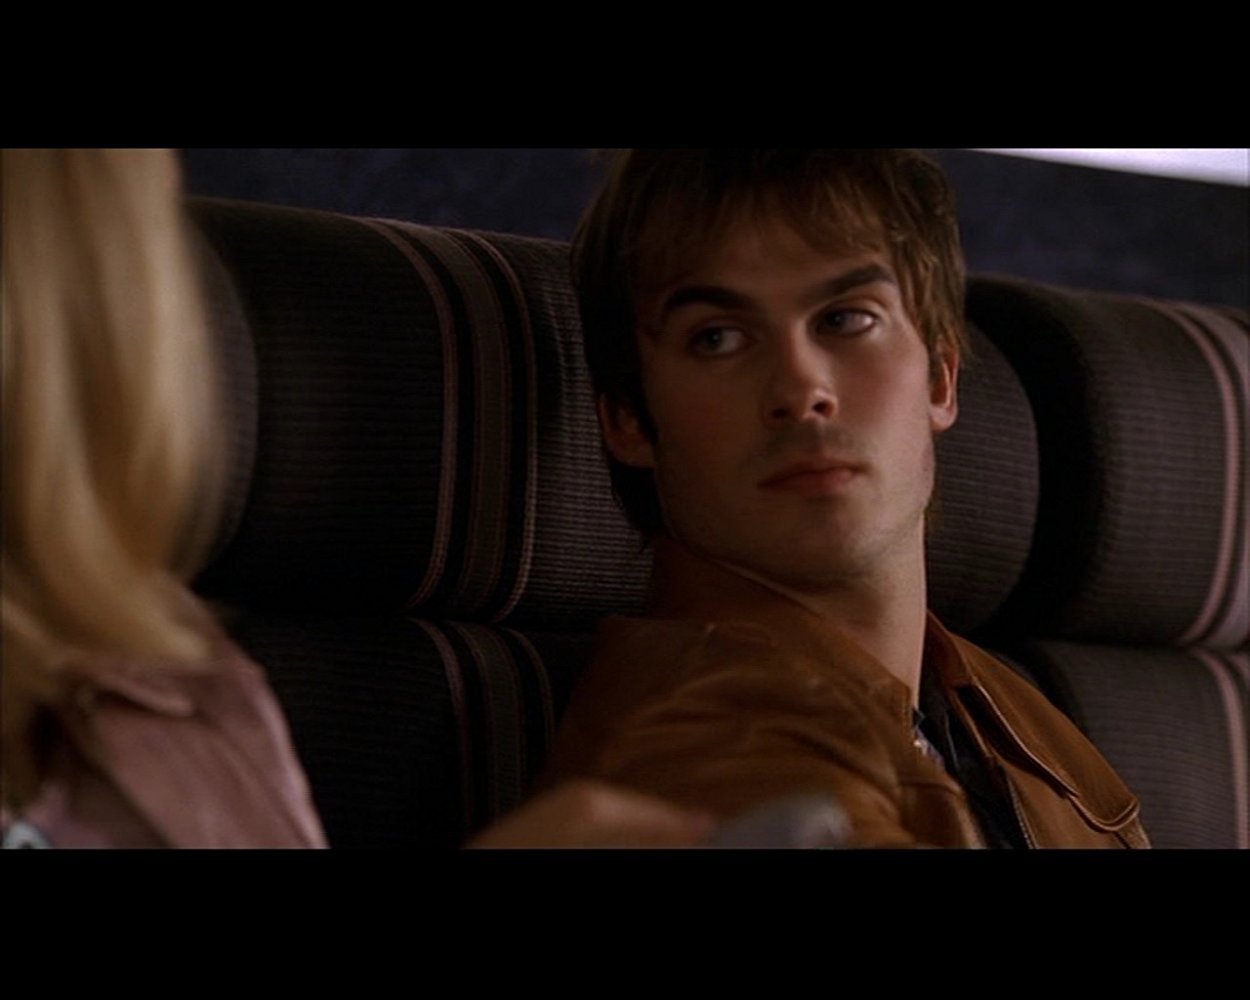 Boone Carlyle